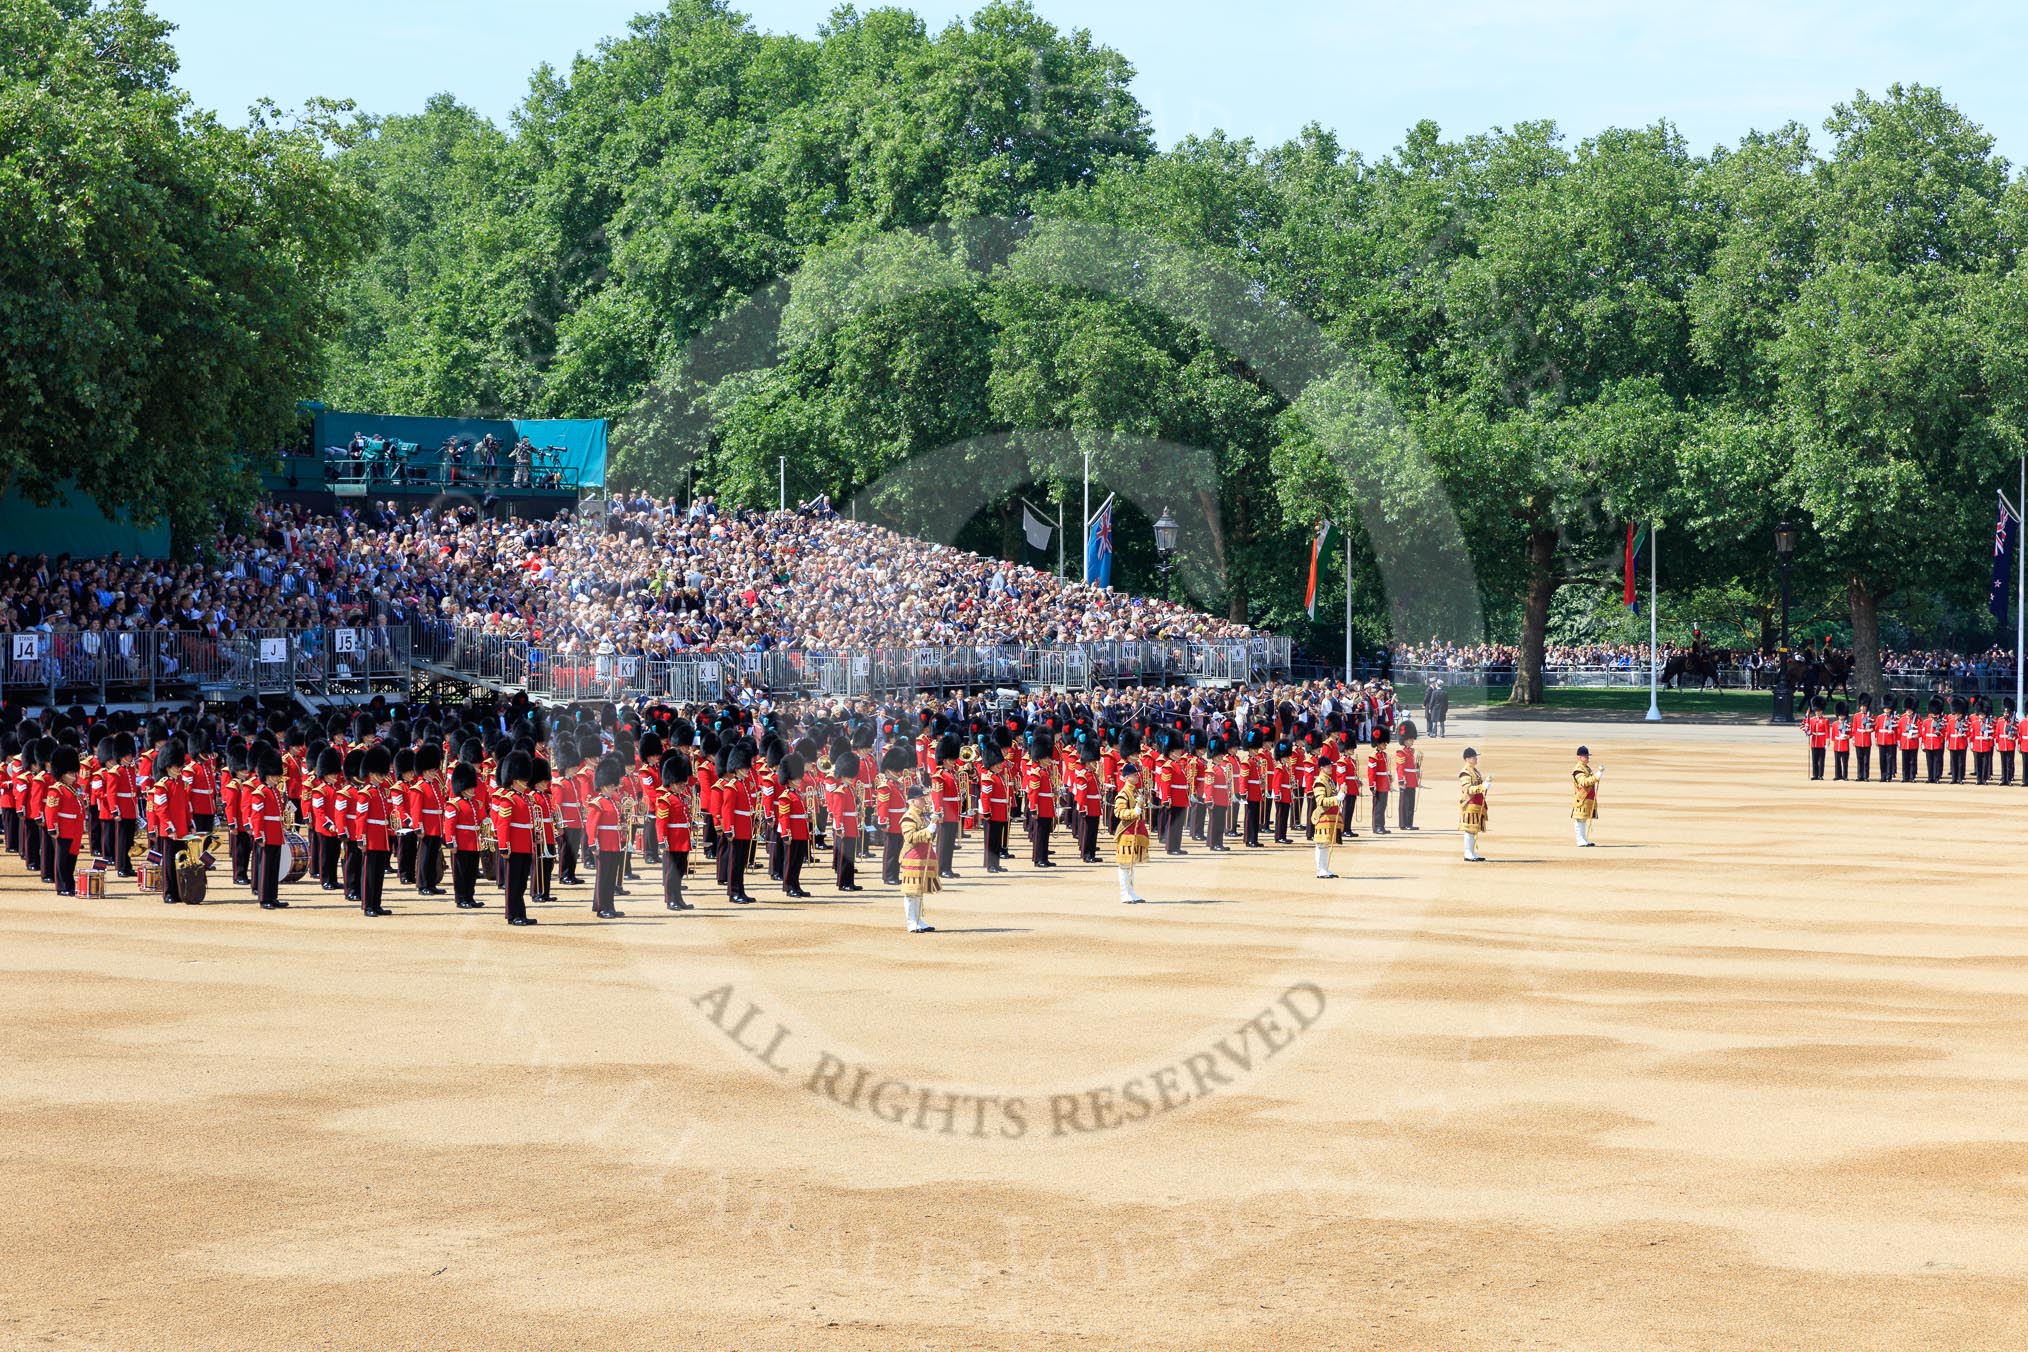 The Massed Bands in position on the Downing Street side of Horse Guards Parade during Trooping the Colour 2018, The Queen's Birthday Parade at Horse Guards Parade, Westminster, London, 9 June 2018, 10:39.